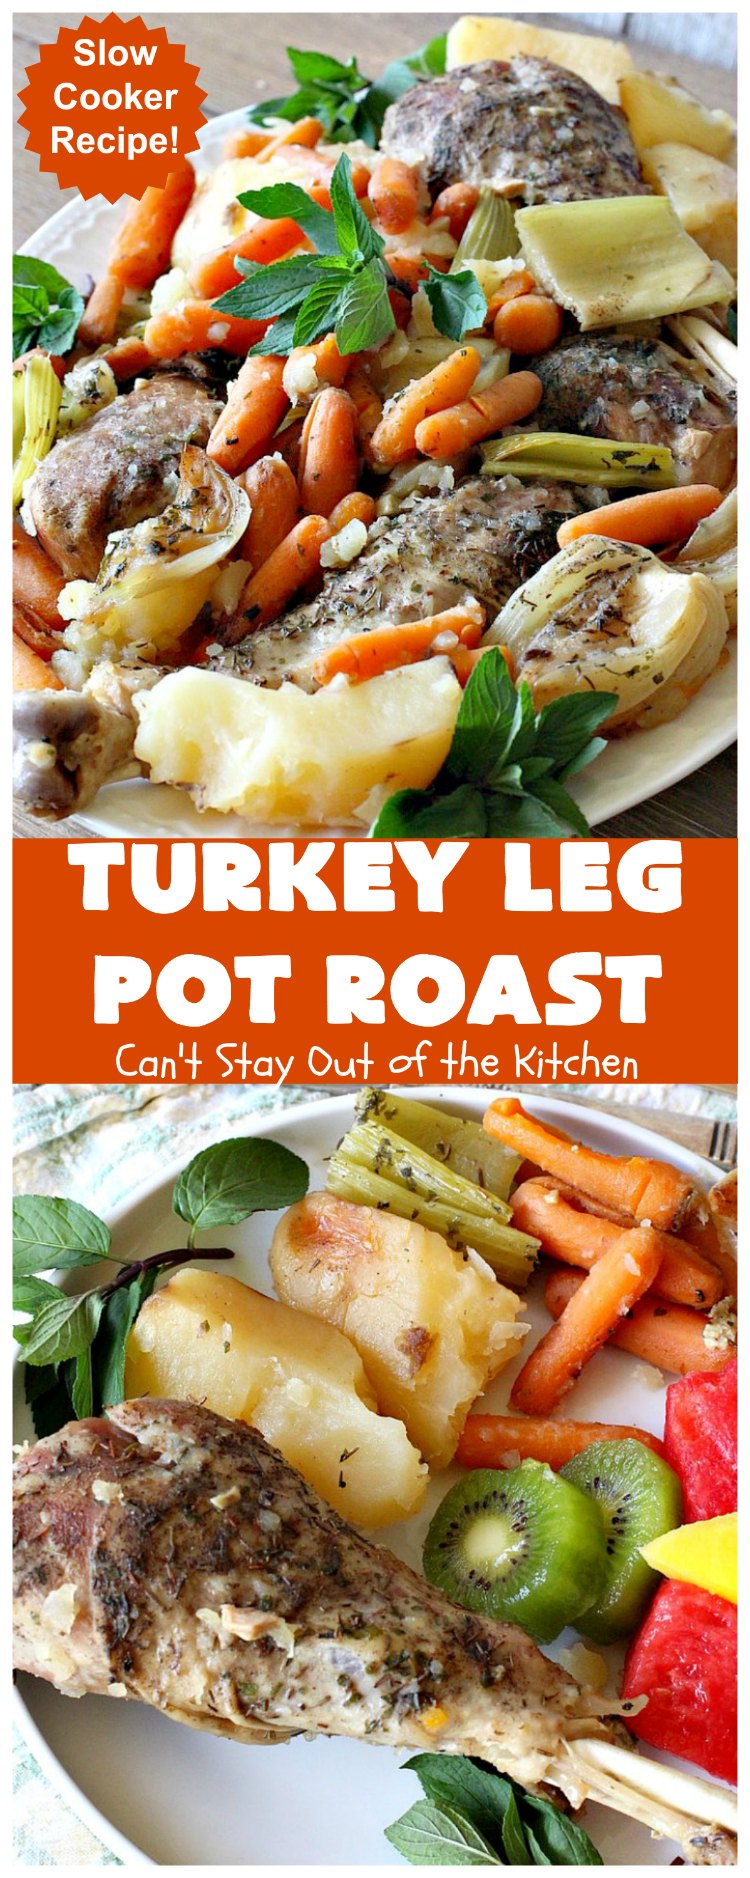 Turkey Leg Pot Roast | Can't Stay Out of the Kitchen | This terrific #PotRoast uses #TurkeyLegs instead of beef! It's #healthy, #LowCalorie & #GlutenFree. So easy to throw together since it's made in the #SlowCooker! #Crockpot #turkey #potatoes #carrots #OnePotMeal #EasyDinnerRecipe #TurkeyLegPotRoast